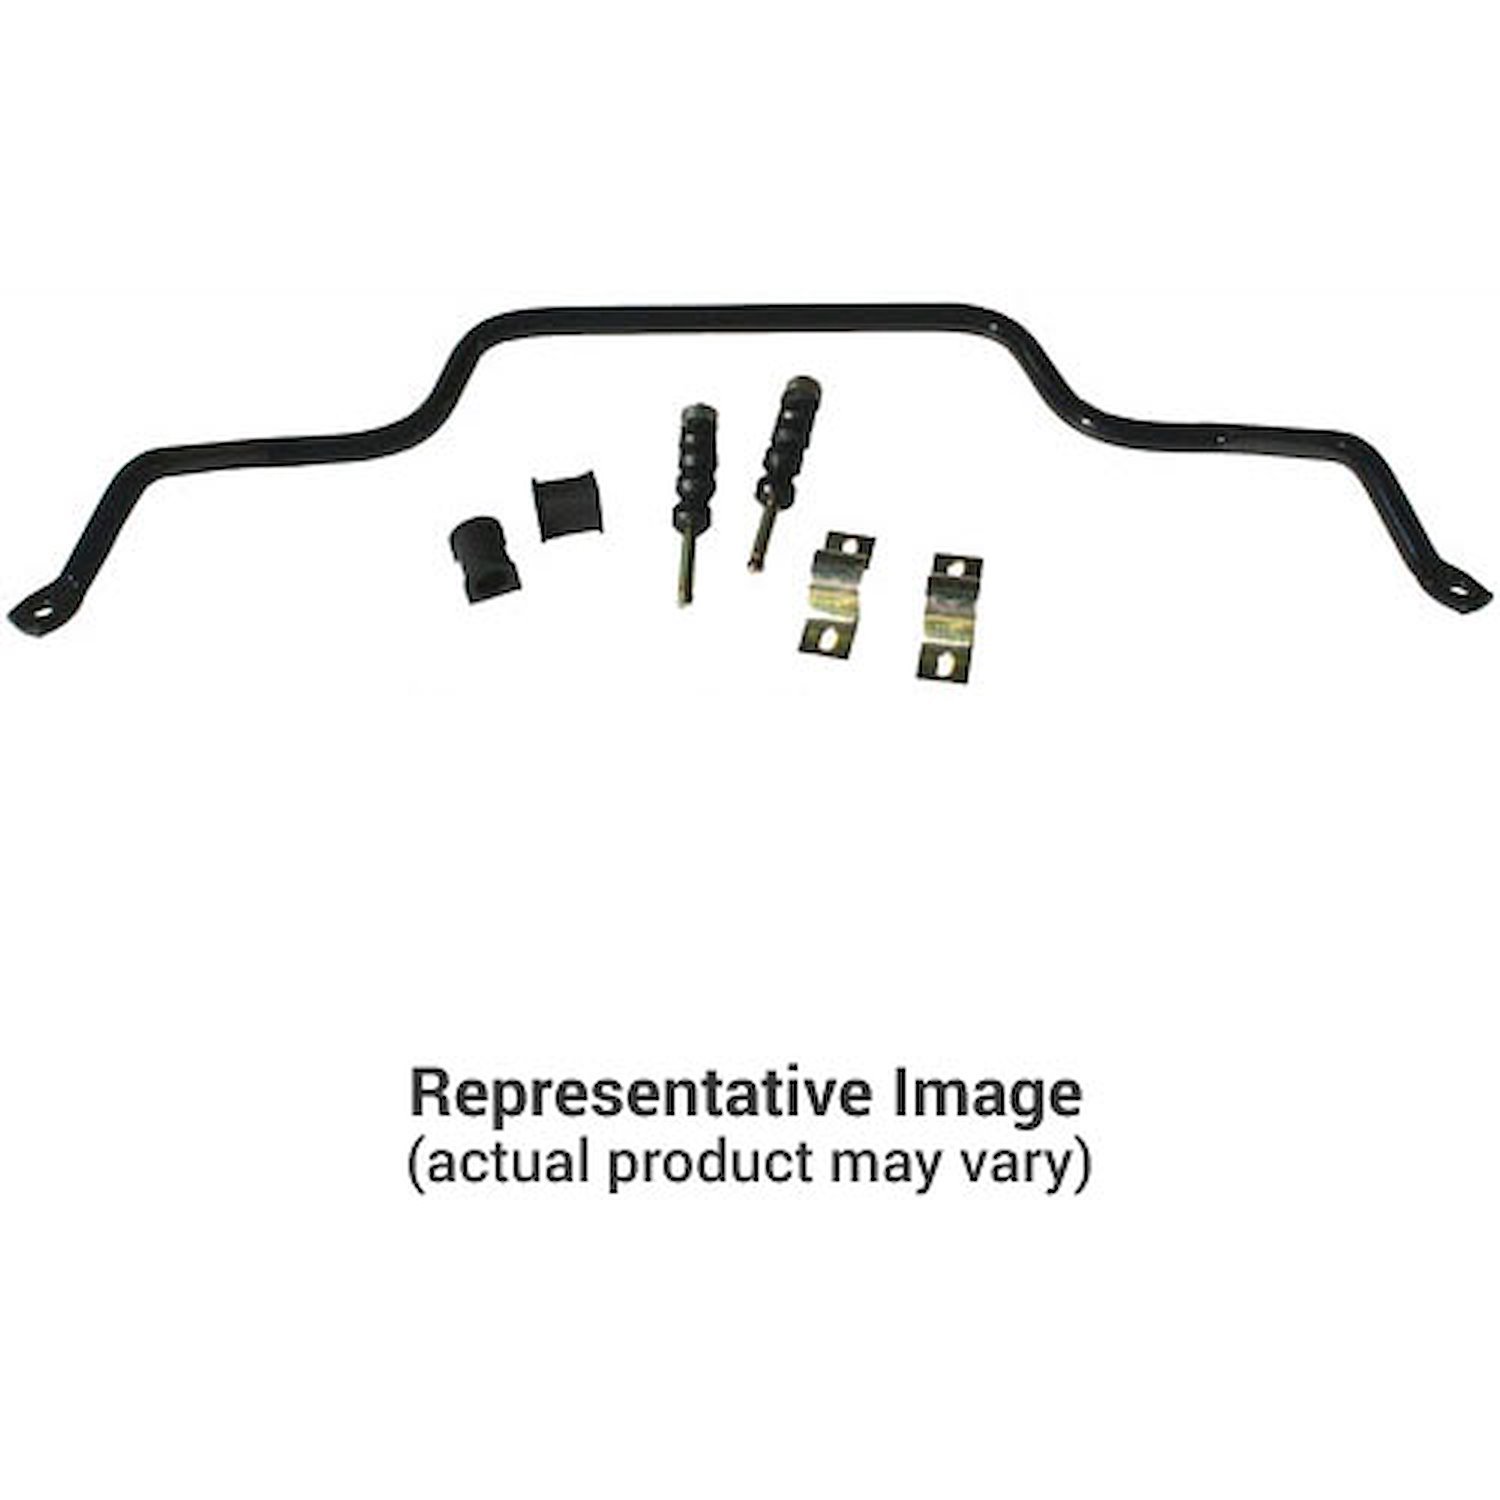 1-1/8" Front Sway Bar 1980-83 GM Celebrity and Citation